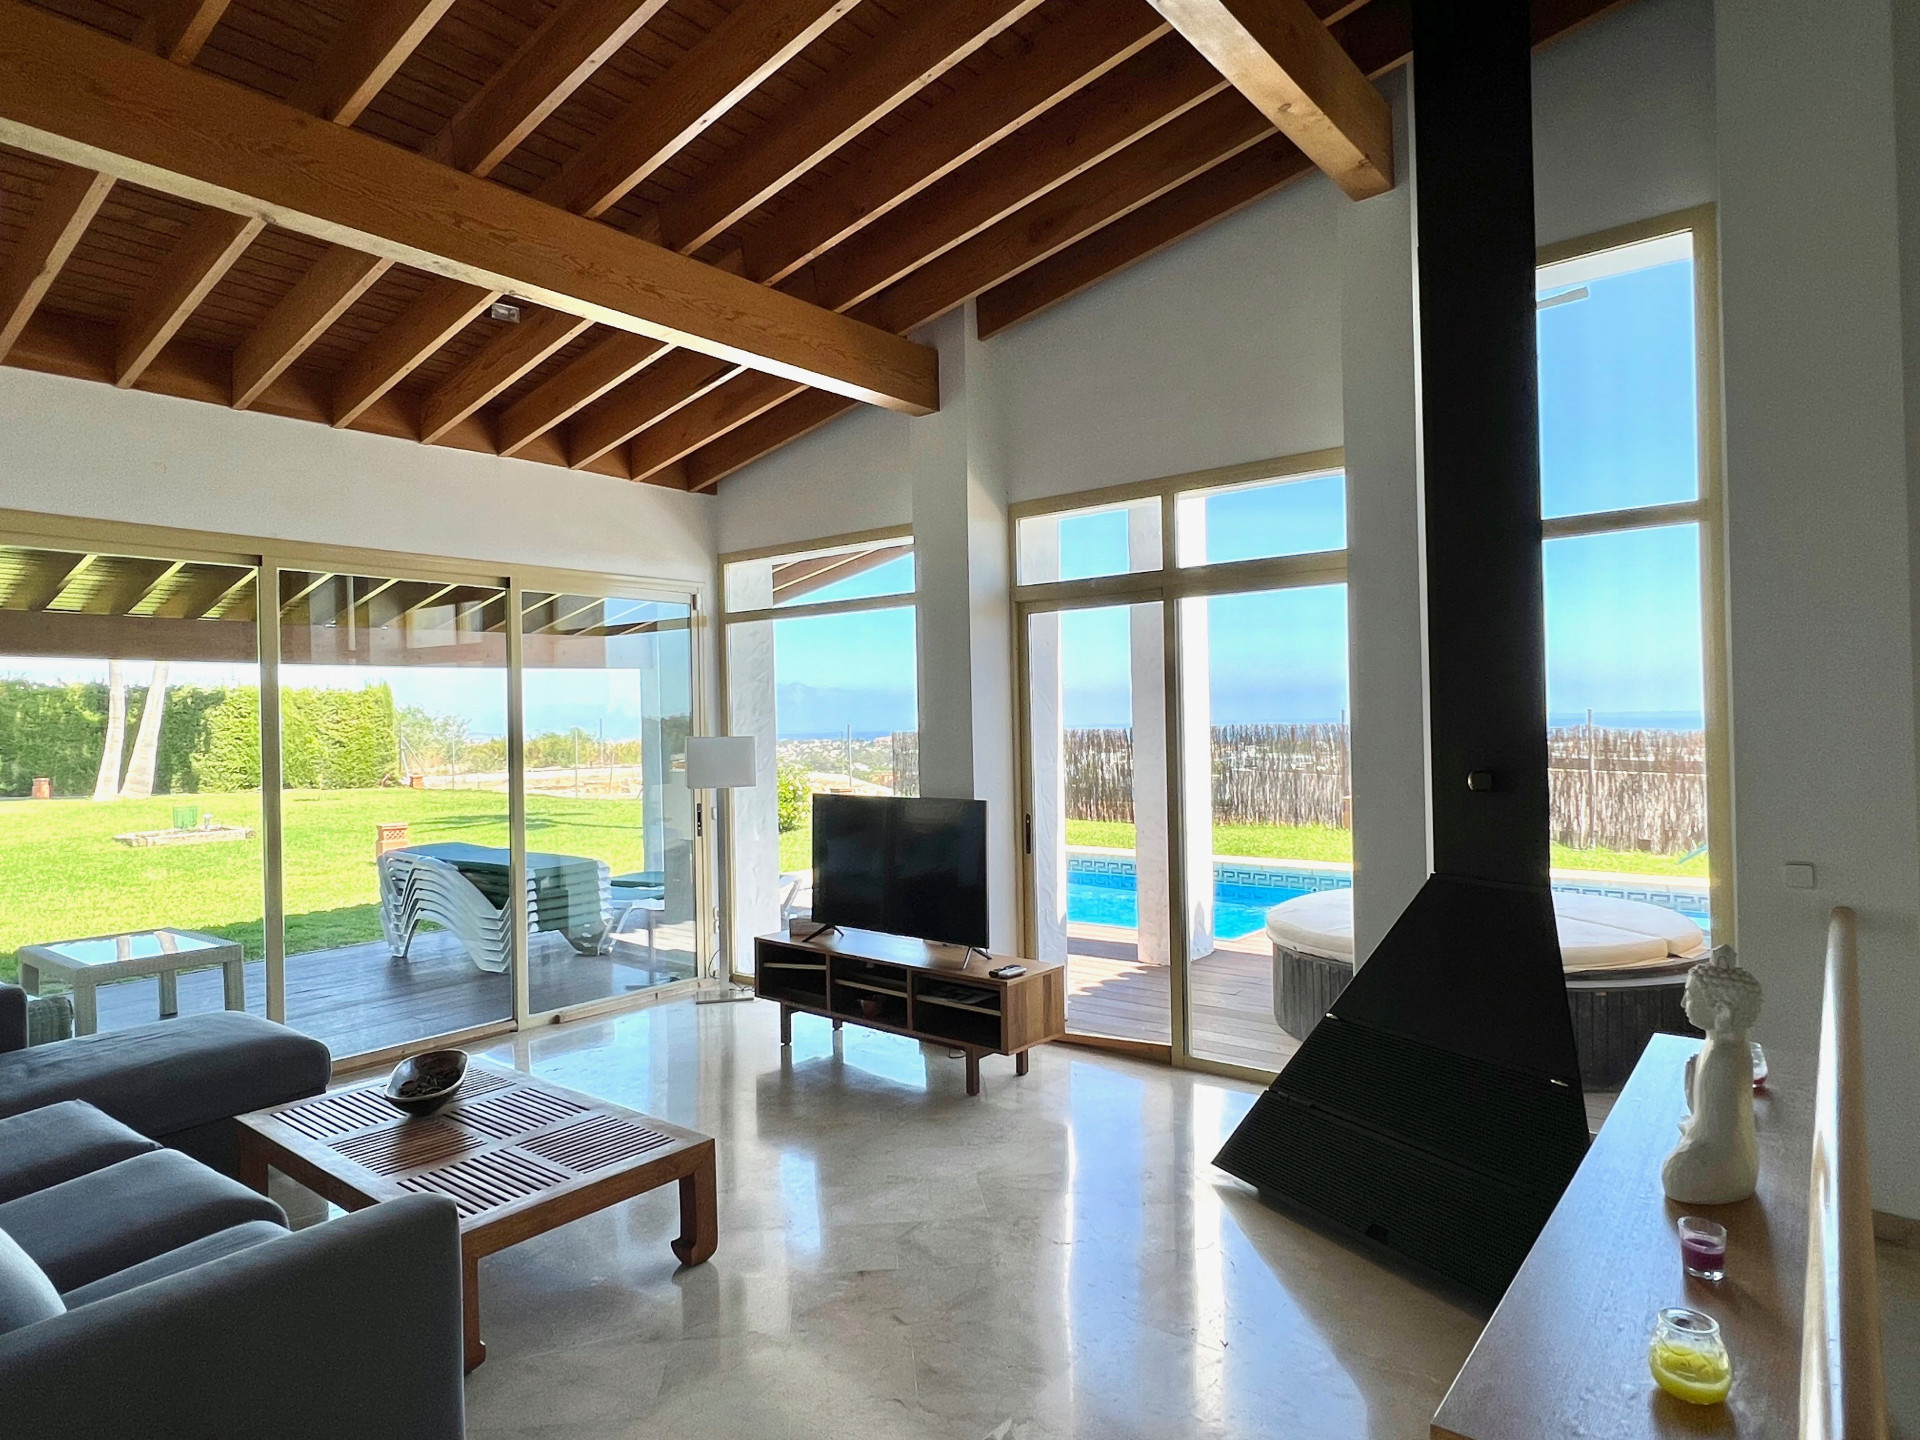 Spacious and modern family villa built on two levels and located in La Alqueria